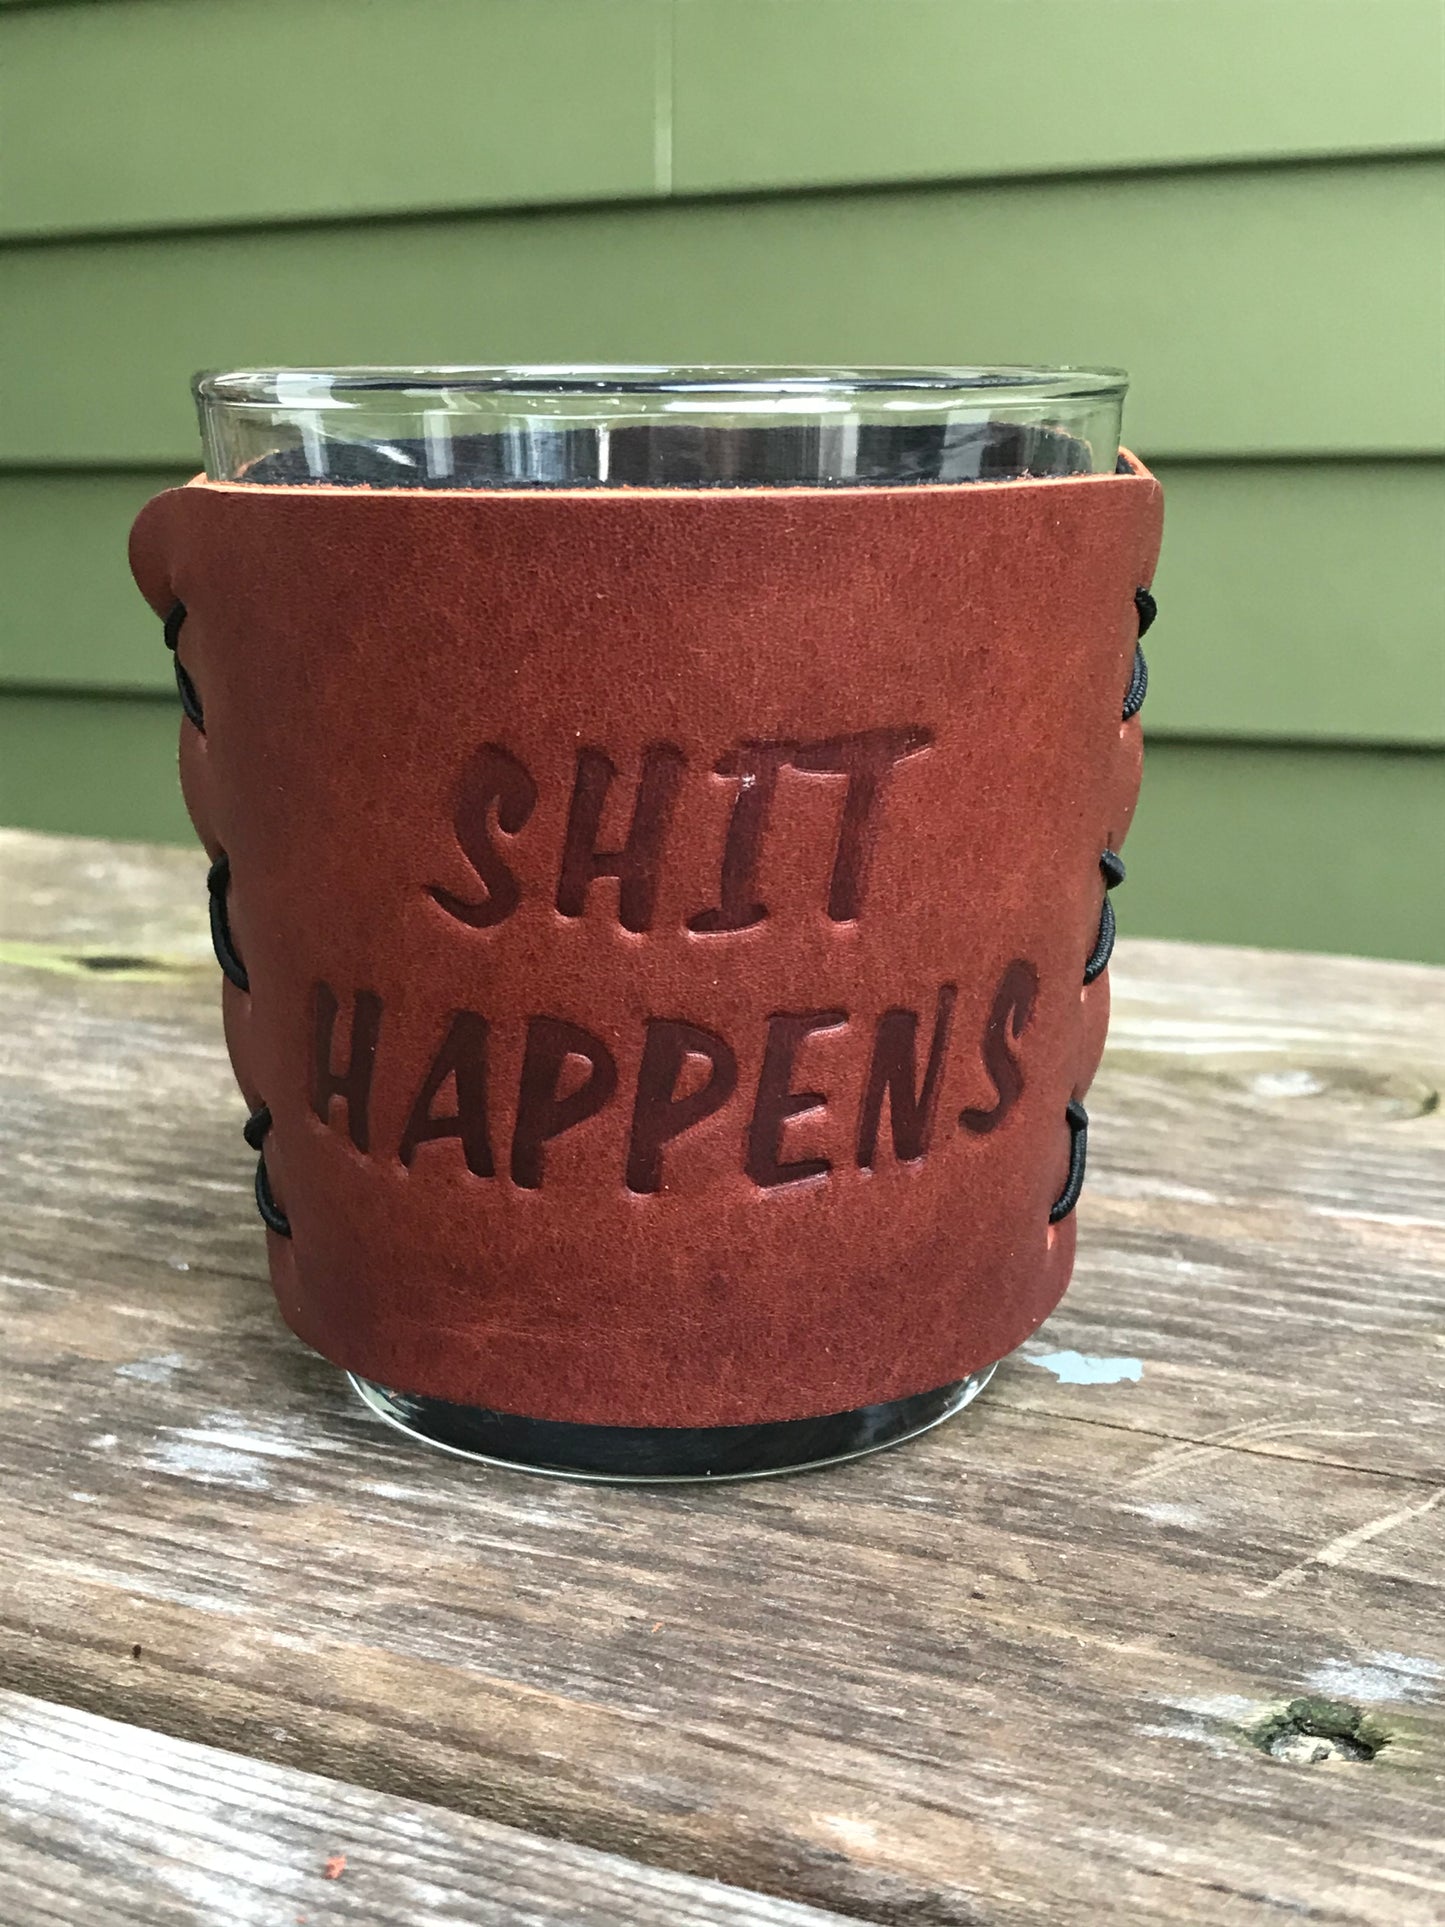 Leather Wrapped Whiskey Glass - Shit Happens